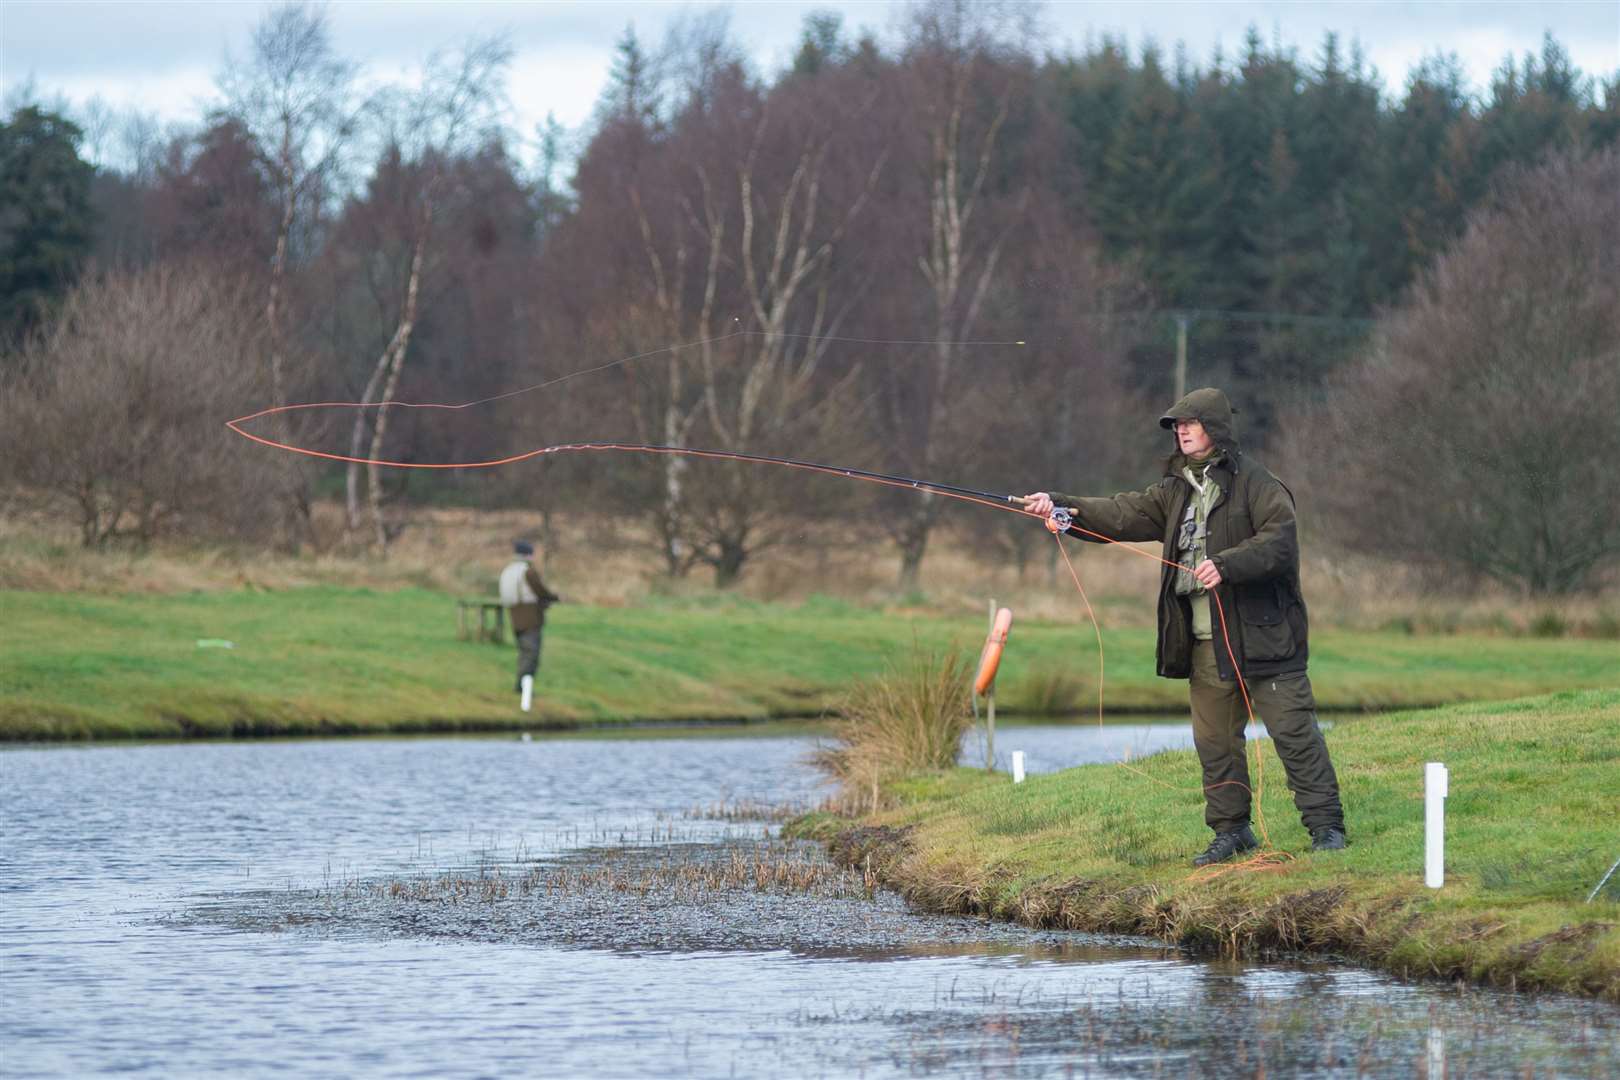 Country sports play a vital role in Scotland's tourism sector.